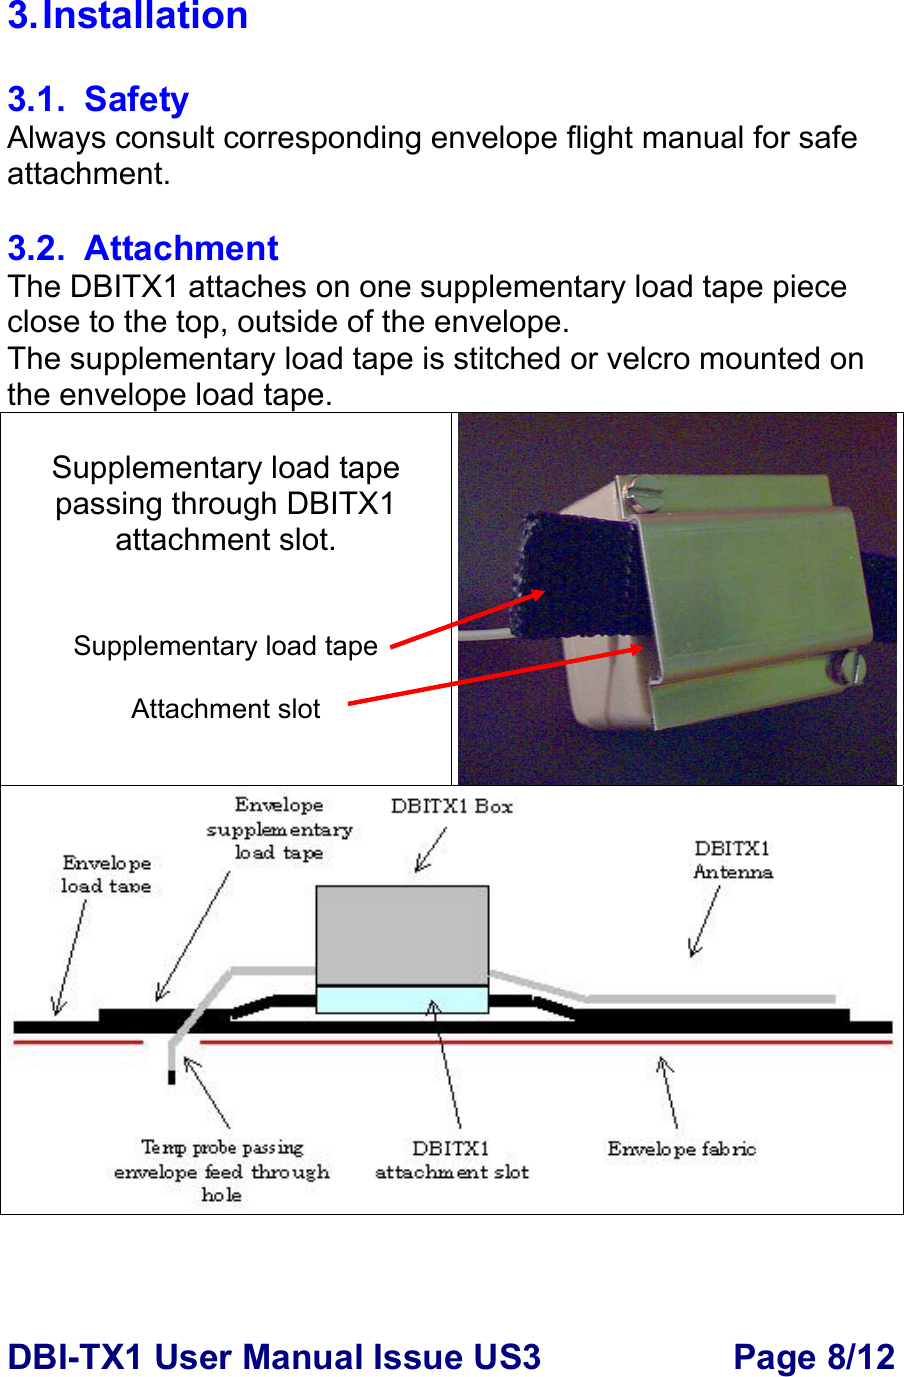 DBI-TX1 User Manual Issue US3  Page 8/12 3. Installation  3.1. Safety Always consult corresponding envelope flight manual for safe attachment.  3.2. Attachment The DBITX1 attaches on one supplementary load tape piece close to the top, outside of the envelope. The supplementary load tape is stitched or velcro mounted on the envelope load tape.   Supplementary load tape passing through DBITX1 attachment slot.   Supplementary load tape  Attachment slot  